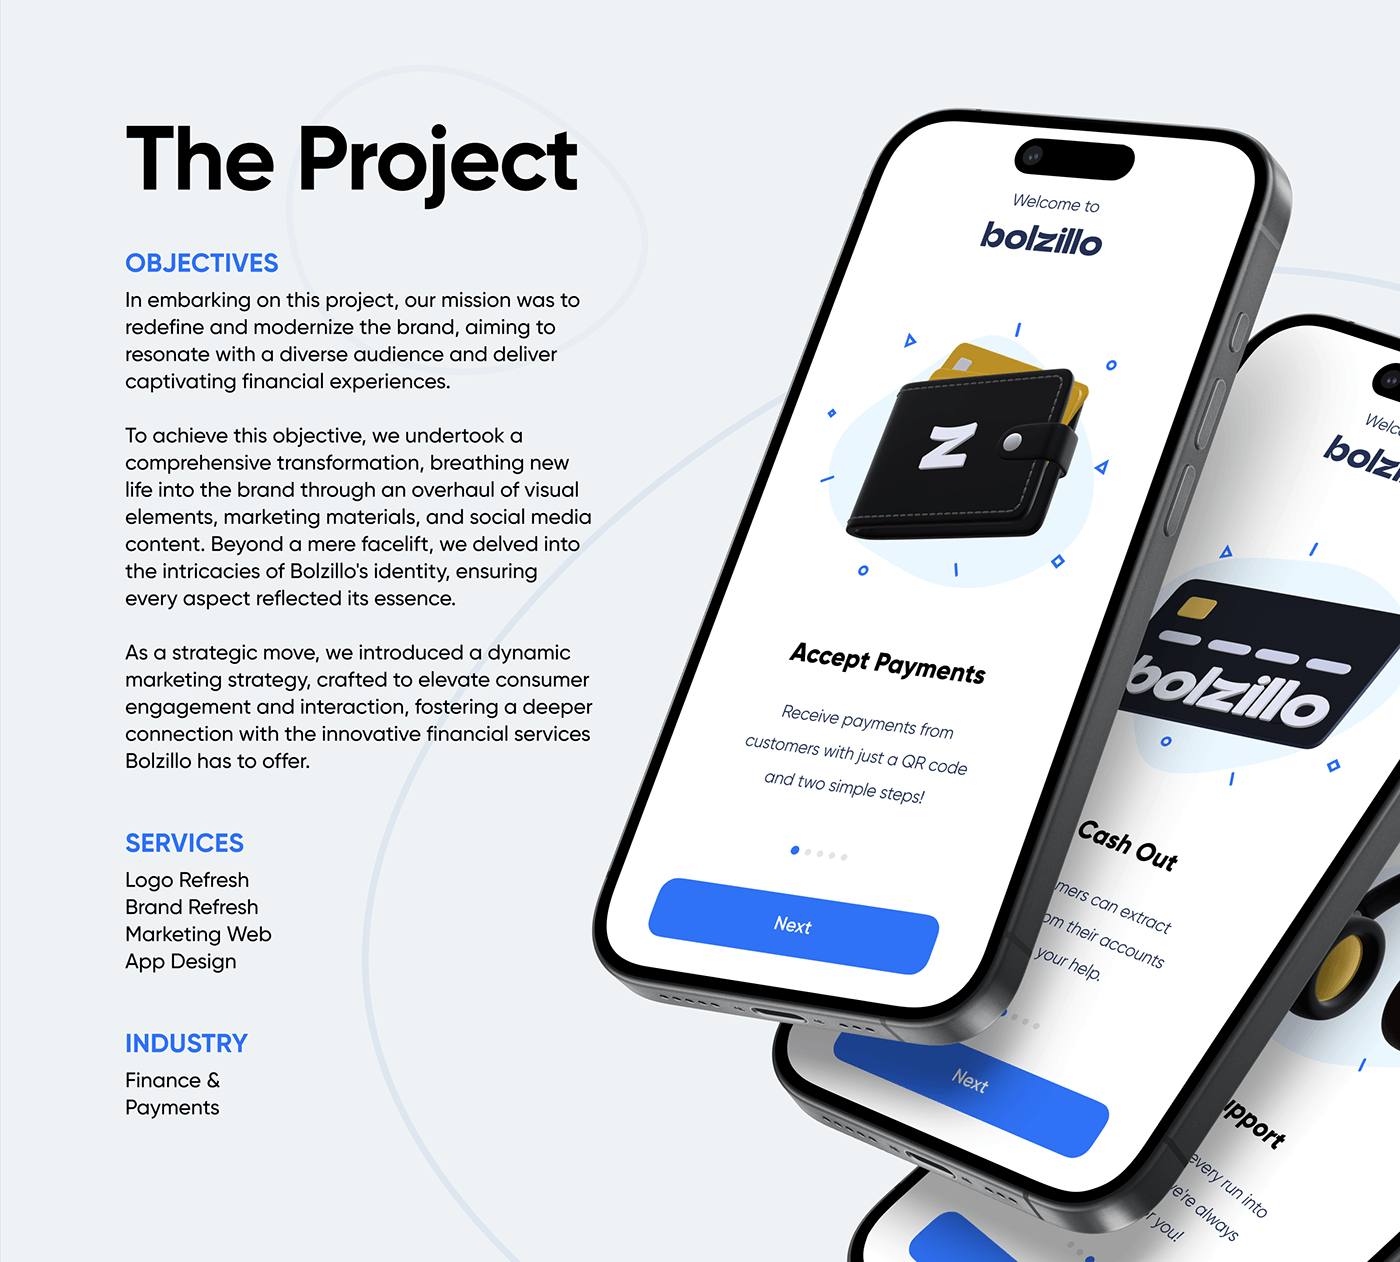 Bolzillo app visuals, bank card illustrations, e-wallet UI, and description of services and industry